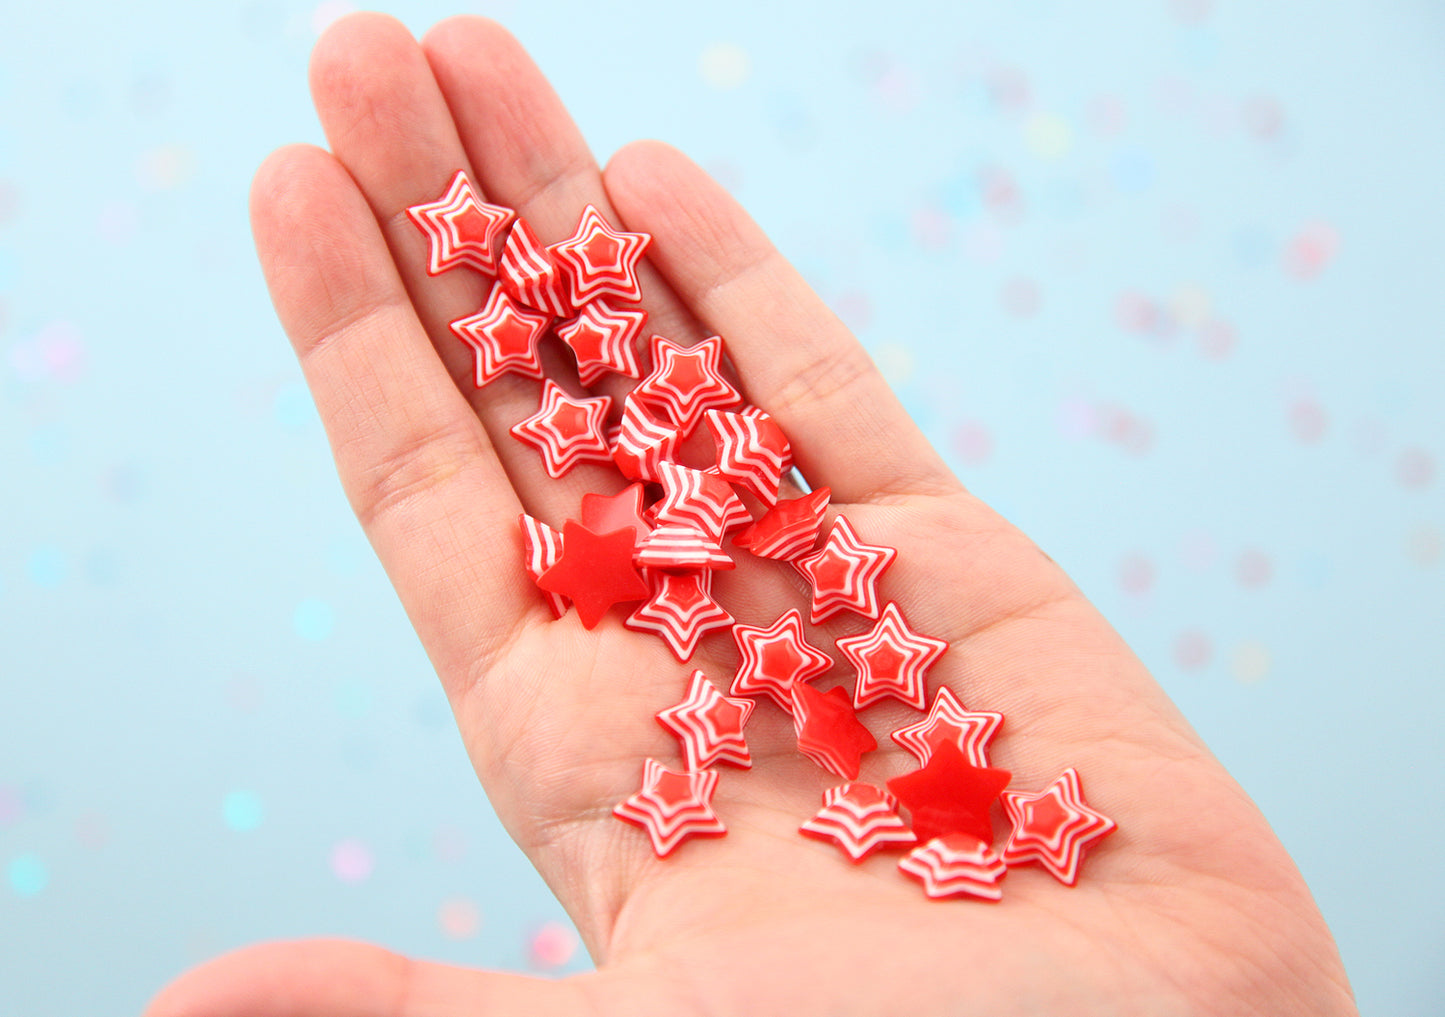 Striped Resin Stars - 13mm Bright Red Striped Resin Star Cabochons - 15 pc set